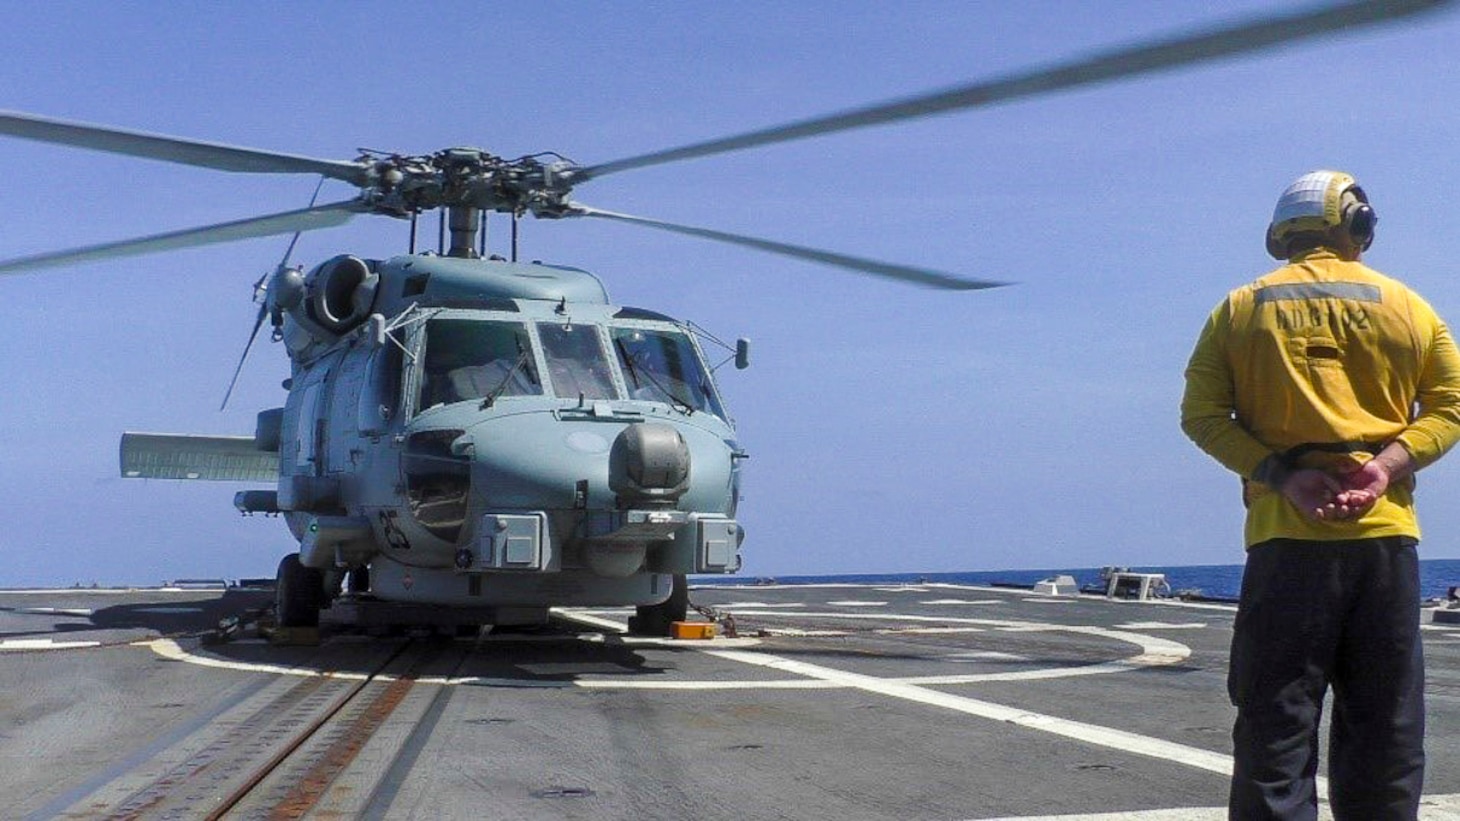 An MH-60R Seahawk Helicopter assigned to the "Scorpions" of Helicopter Maritime Strike Squadron (HSM) 49 prepares for take-off from the Arleigh Burke-class guided-missile destroyer USS Sampson (DDG 102) as the ship is positioned to conduct lifesaving actions in support of disaster relief efforts in Tonga. The Australian Government response is being coordinated closely with France and New Zealand under the FRANZ partnership; alongside Fiji, Japan, United Kingdom, and the United States, to assist Tonga in its time of need. Sampson is on a scheduled deployment in the U.S. 7th Fleet area of operations to enhance interoperability with alliances and partnerships while serving as a ready-response force in support of a free and open Indo-Pacific region.